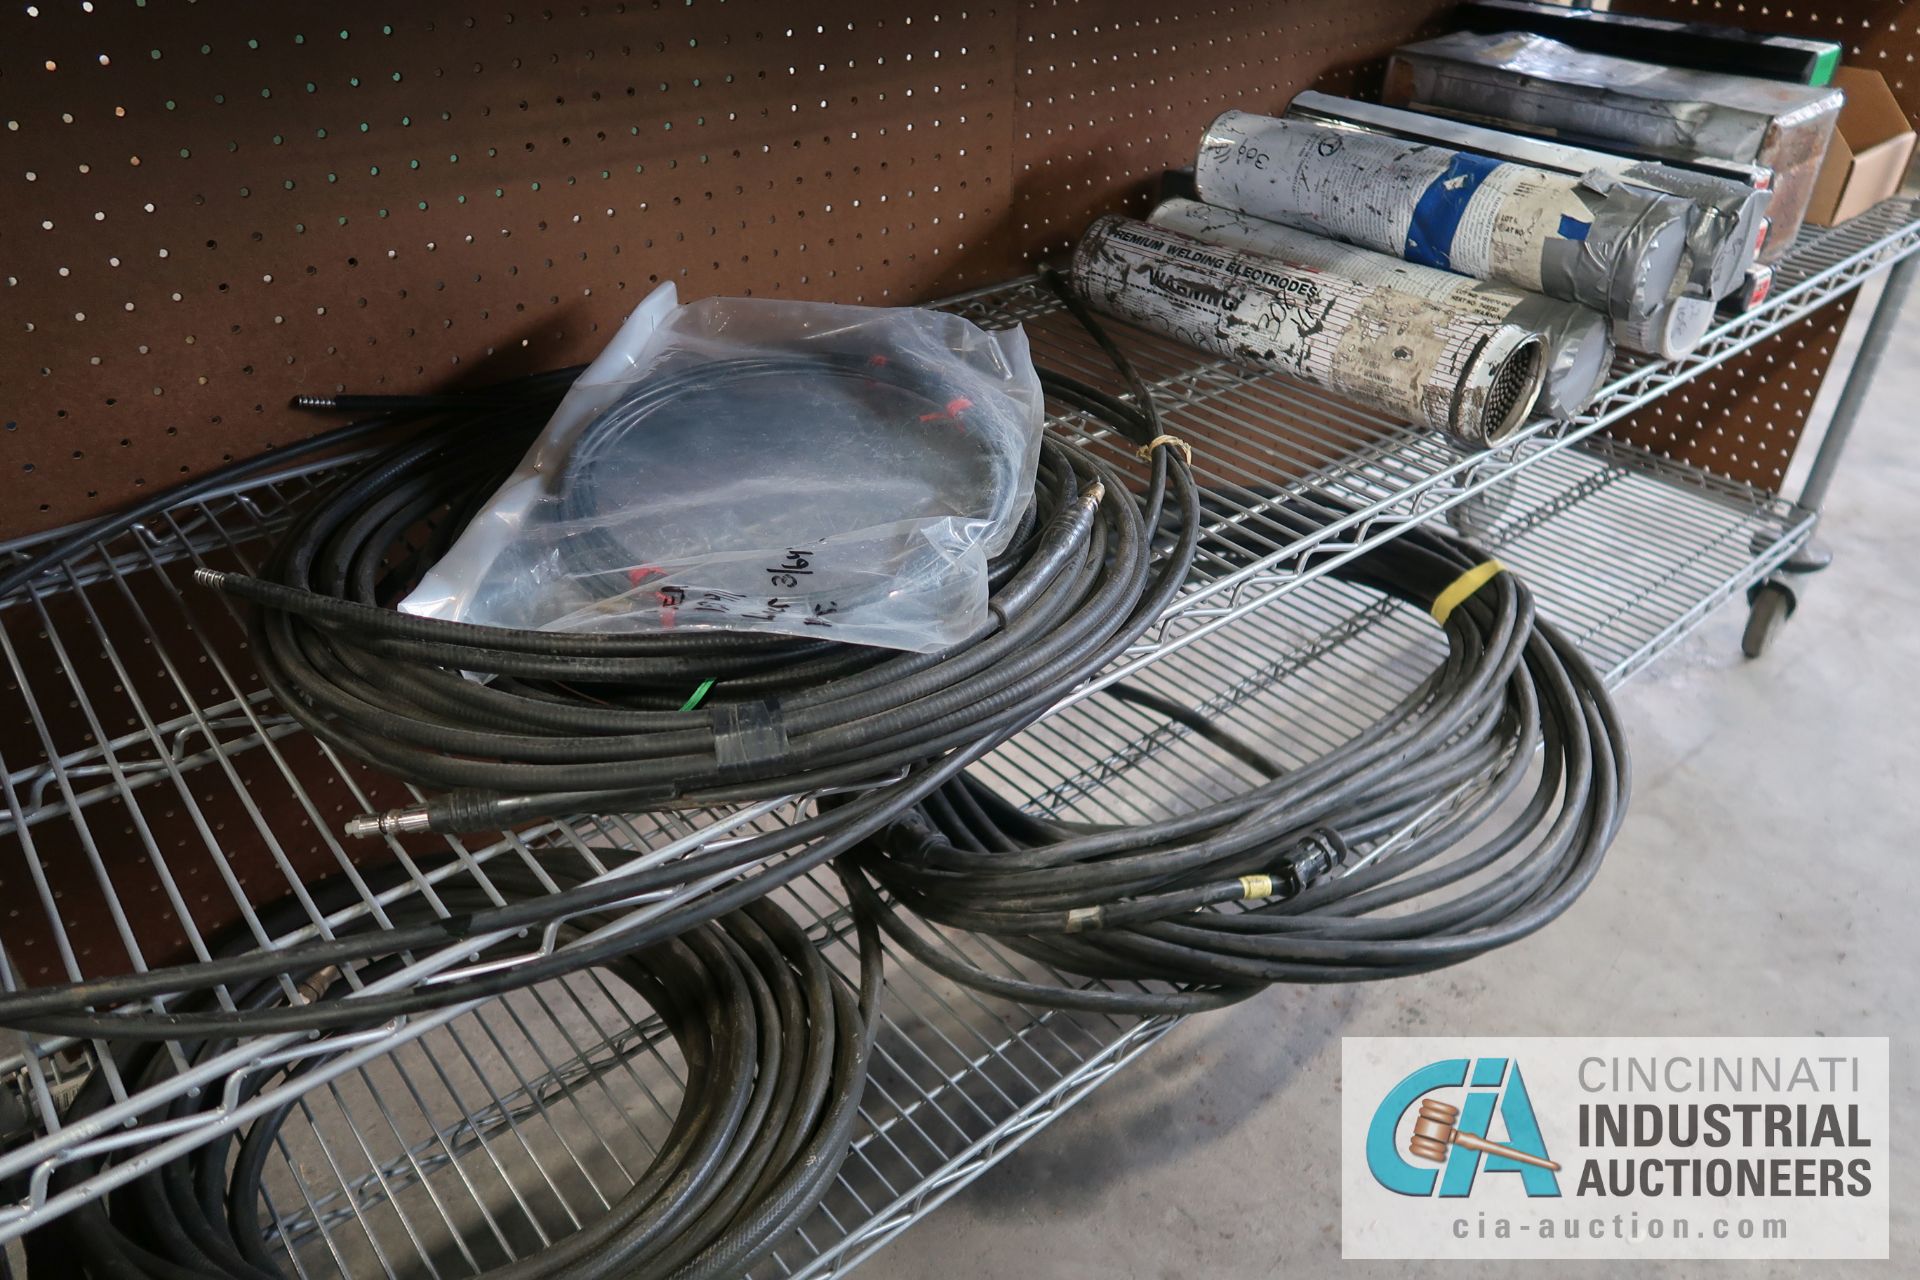 (LOT) MISCELLANEOUS WELDING WIRE FEED CONTROLS, MIG GUNS WITH HOSE AND OTHER WIRE FEED AND WELDING - Image 3 of 4